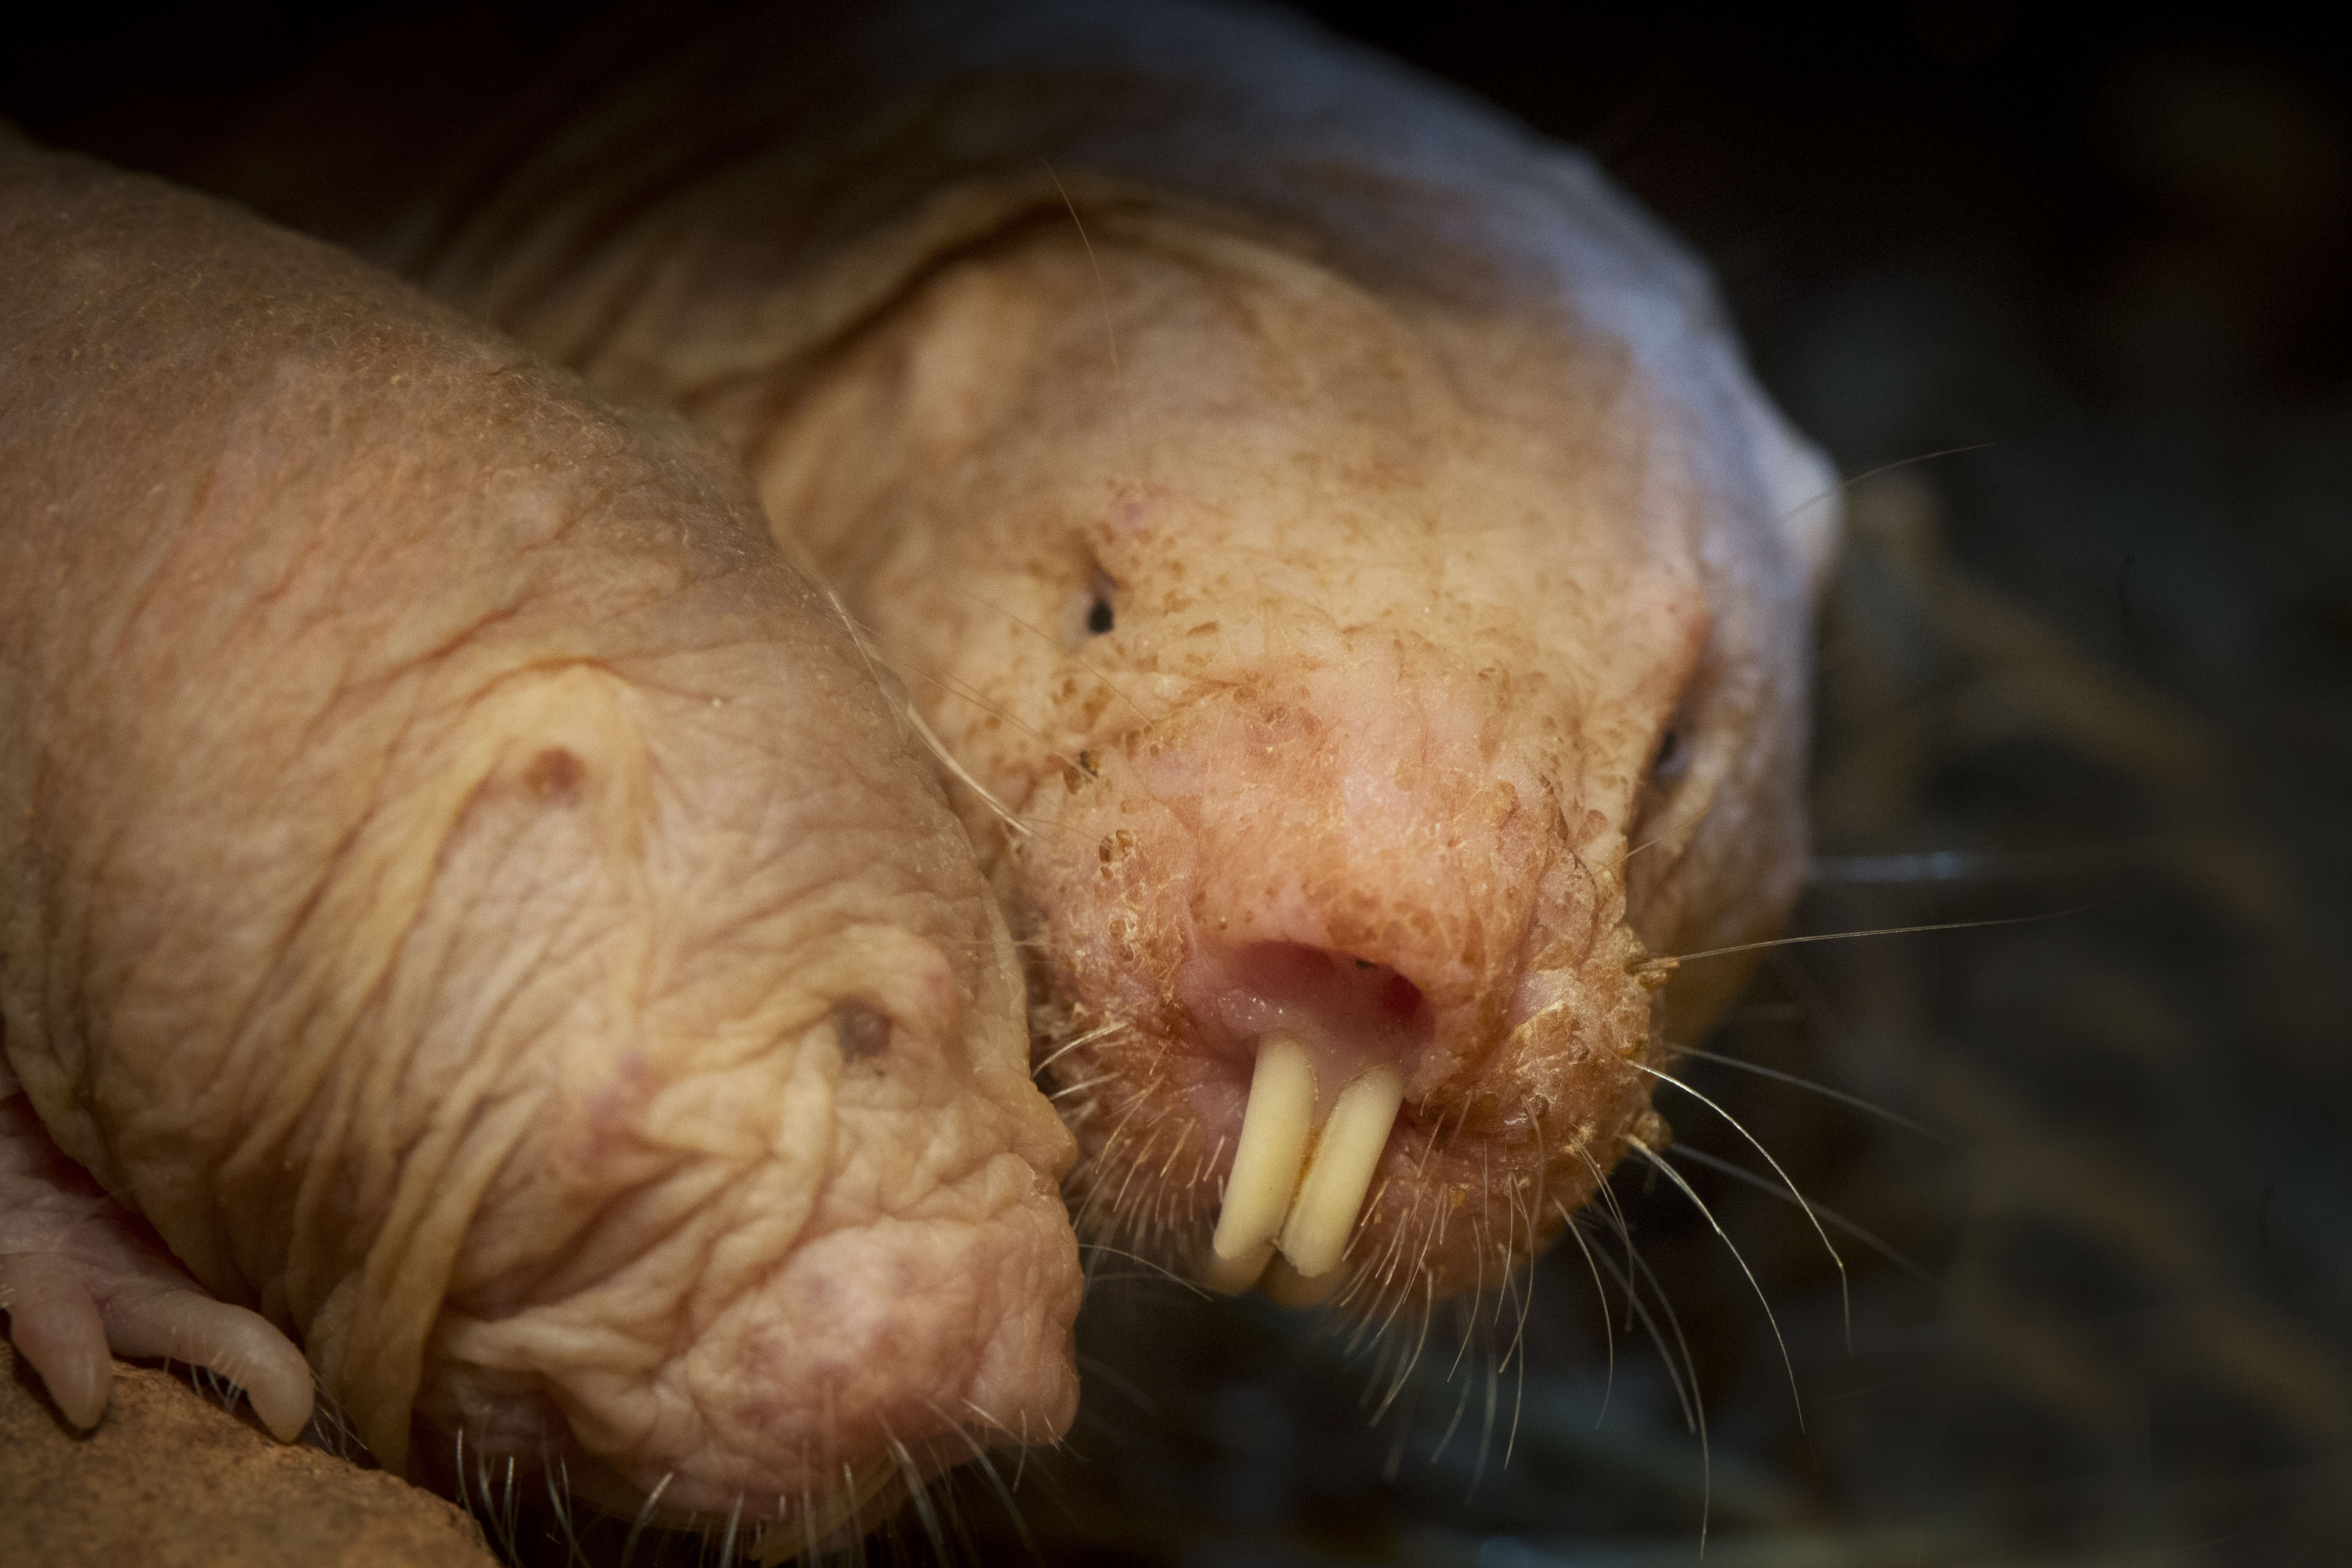 An older naked mole-rat checking up on its sibling. Credit: Lorna Faulkes Photography